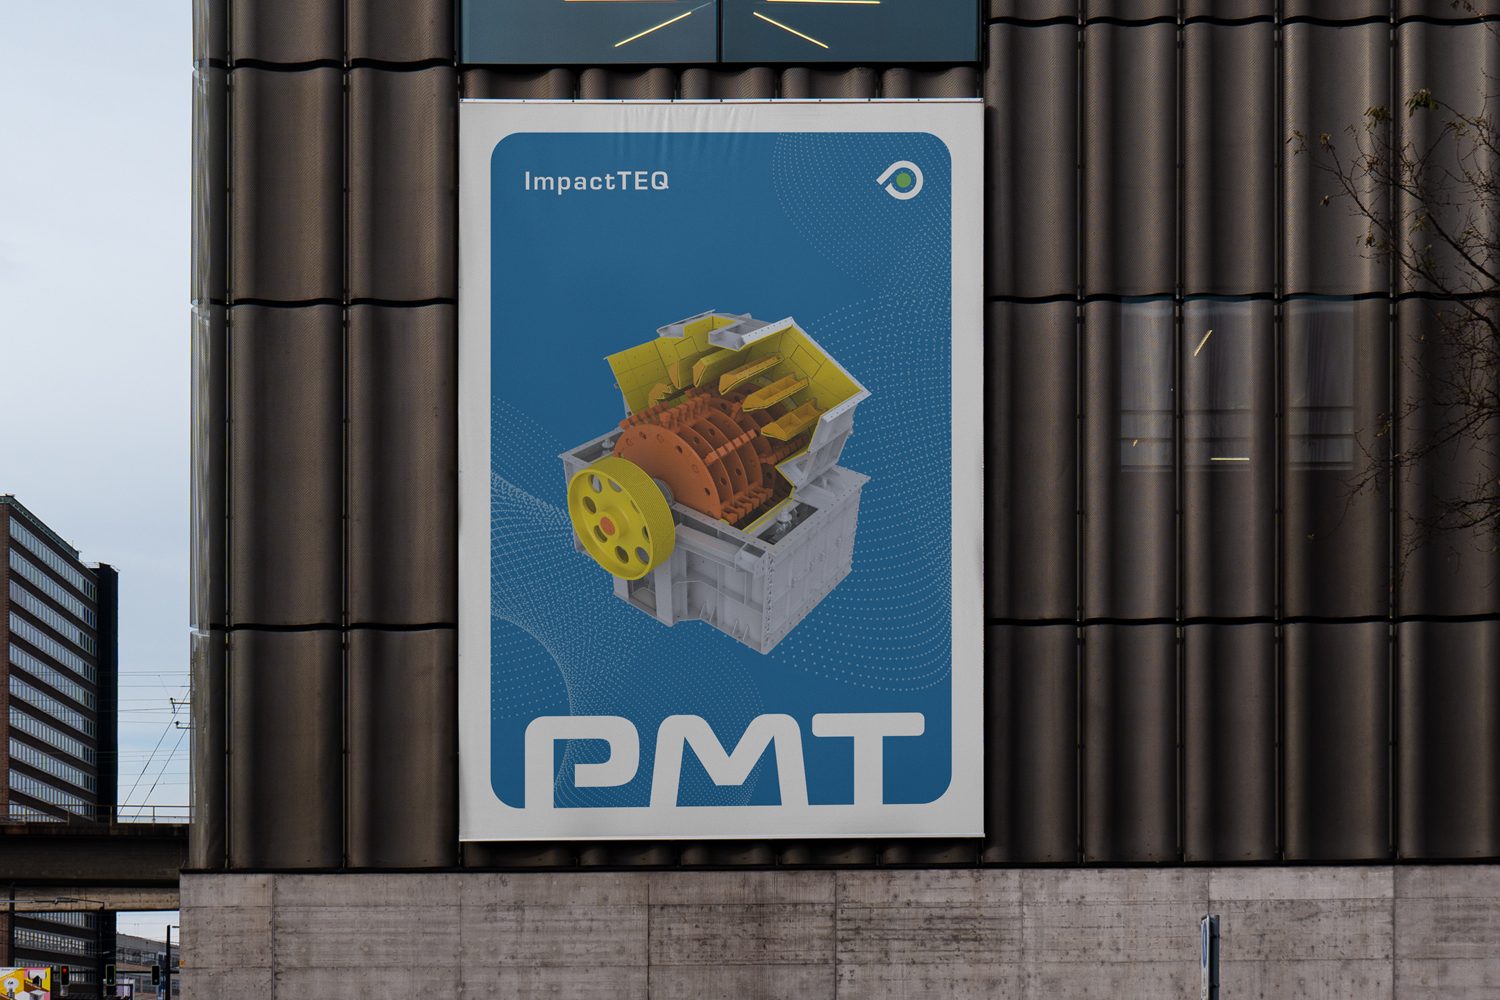 An advertisement for PMT on a building.